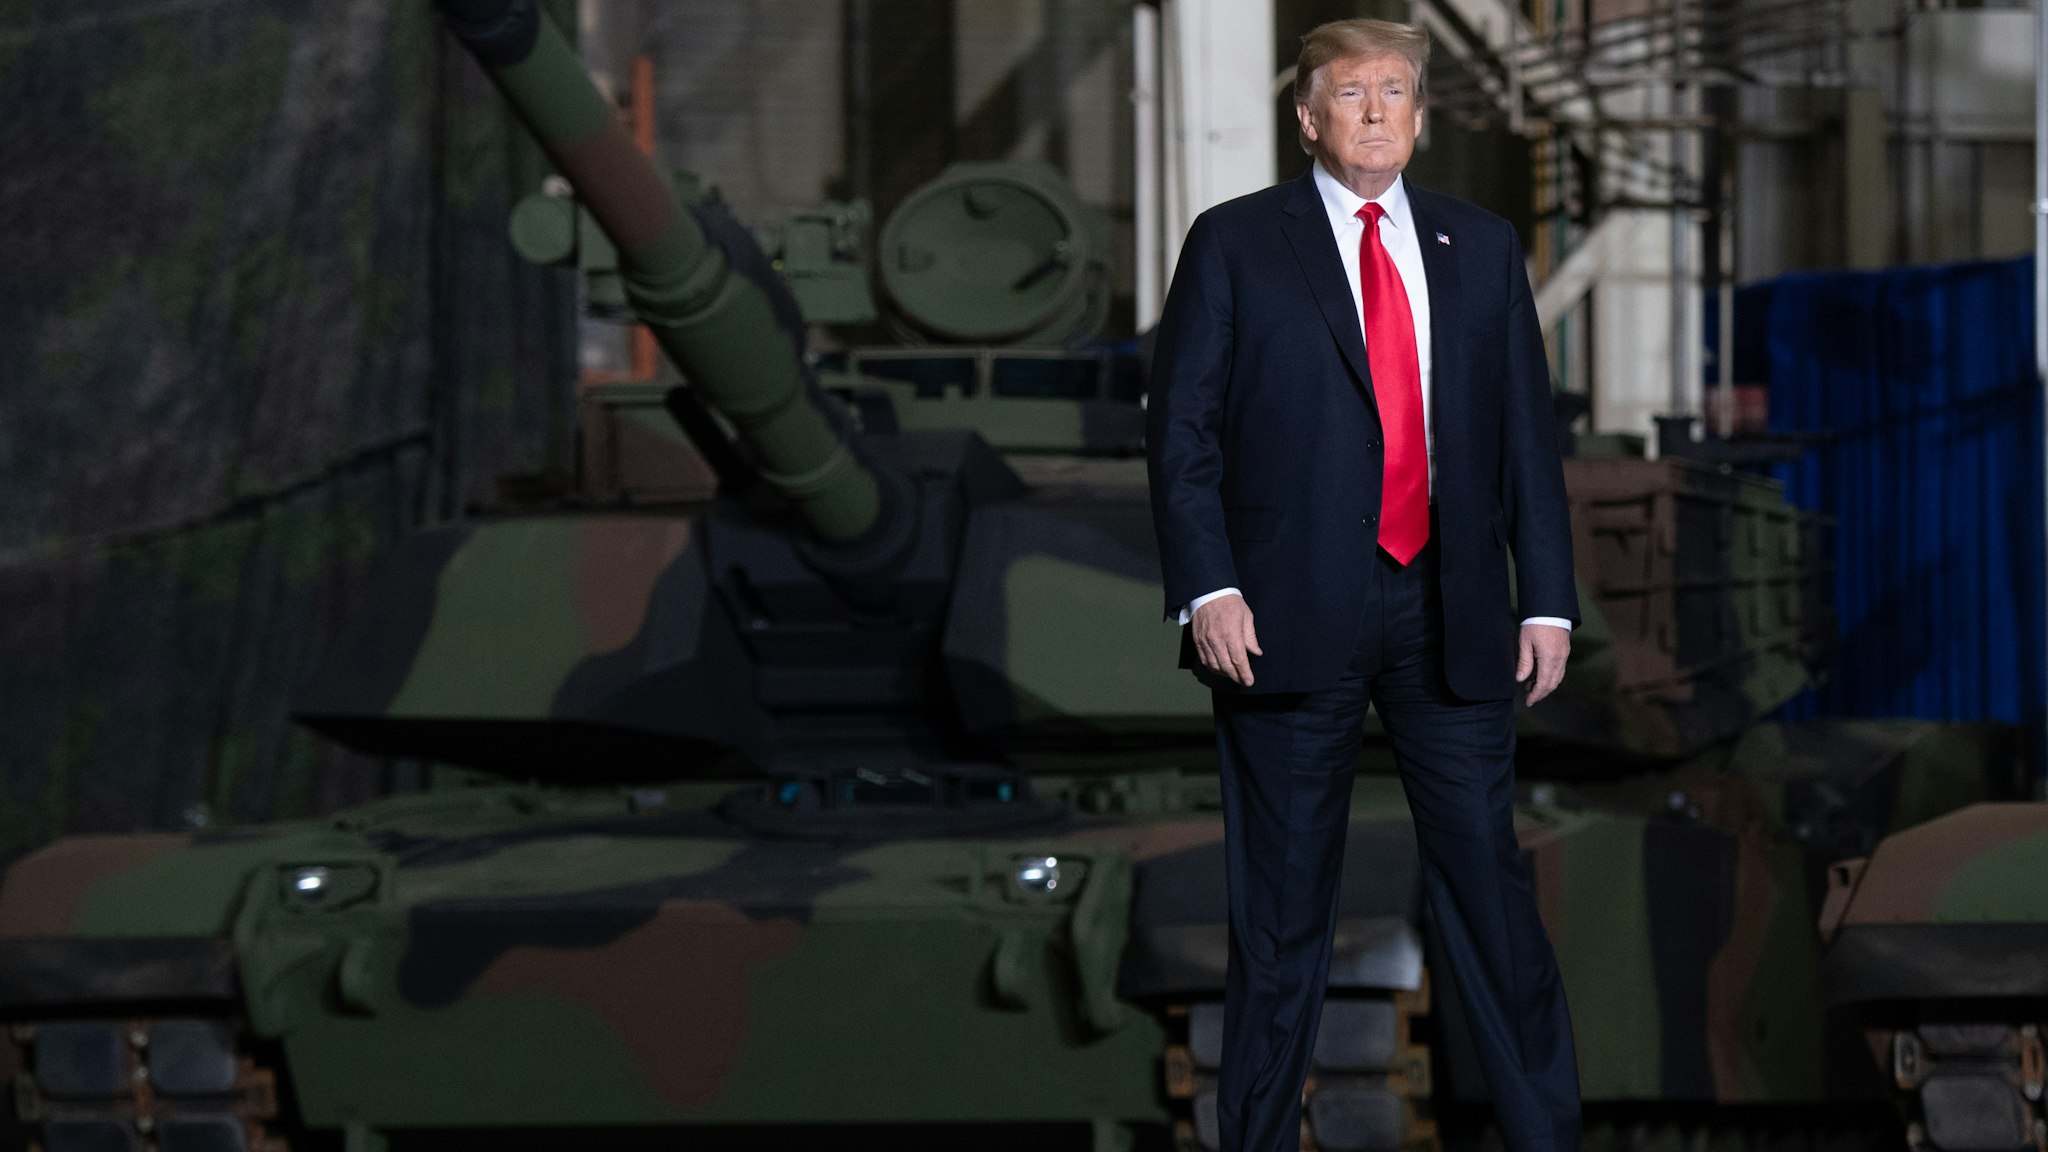 US President Donald Trump arrives to speak after touring the Lima Army Tank Plant at Joint Systems Manufacturing in Lima, Ohio, March 20, 2019.